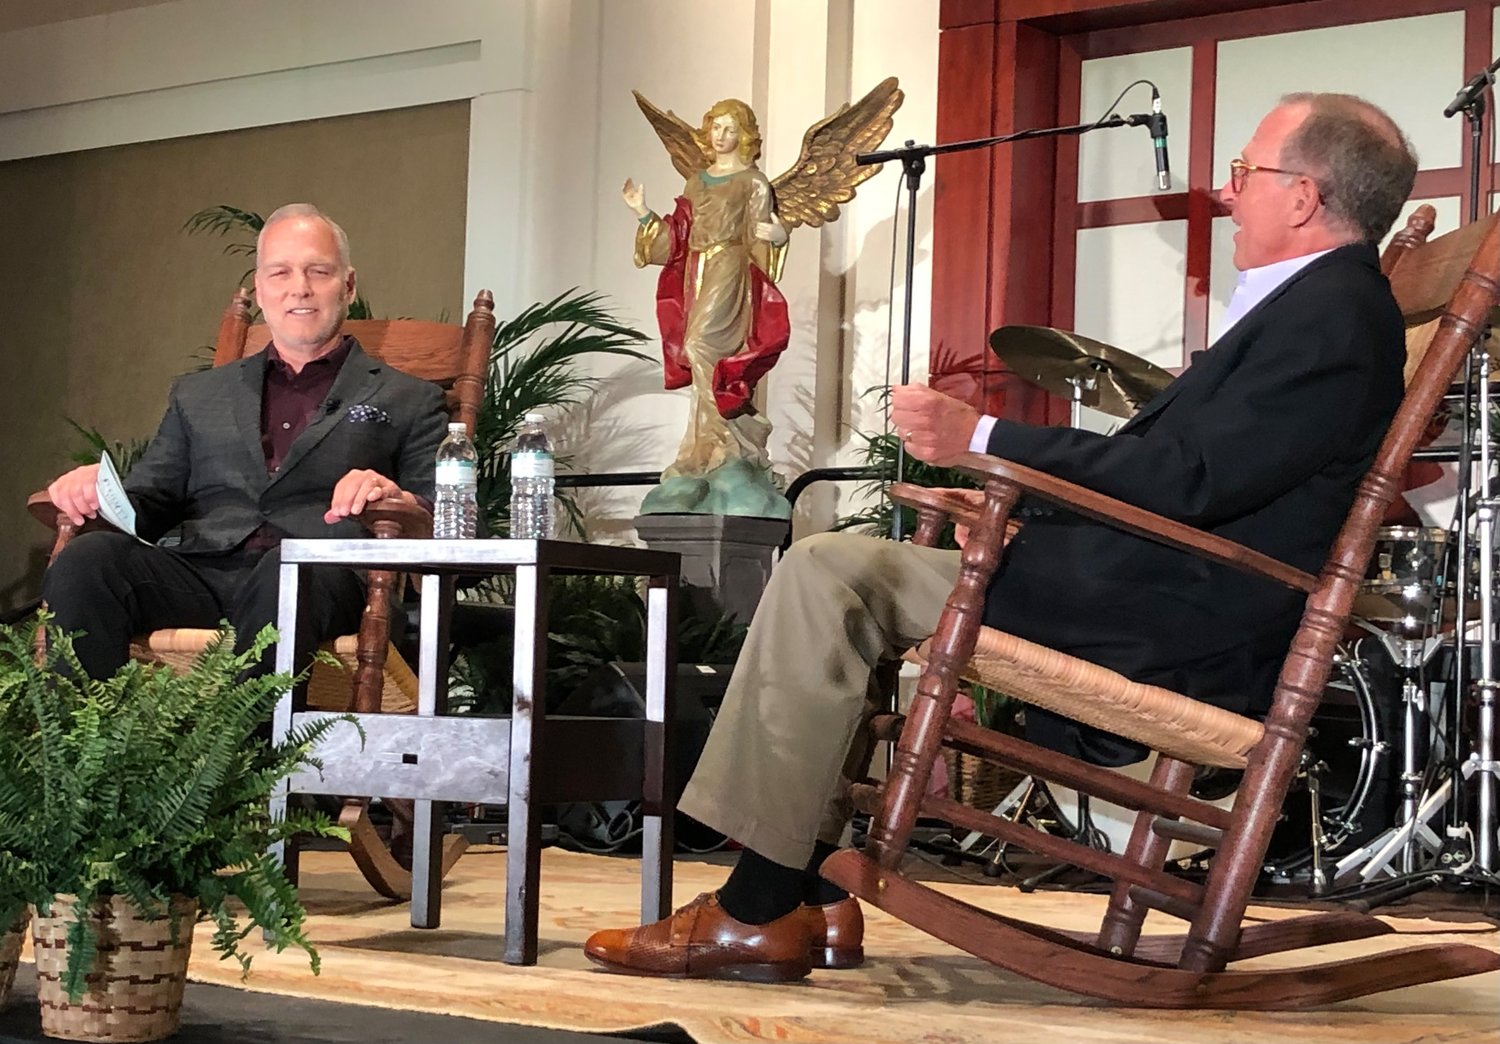 Former UGA Head Football Coach Mark Richt, left, answers questions posed by Bryant Wright during the Cobb County Prayer Breakfast on Thursday, May 5, 2022. (Photo/J. Gerald Harris)